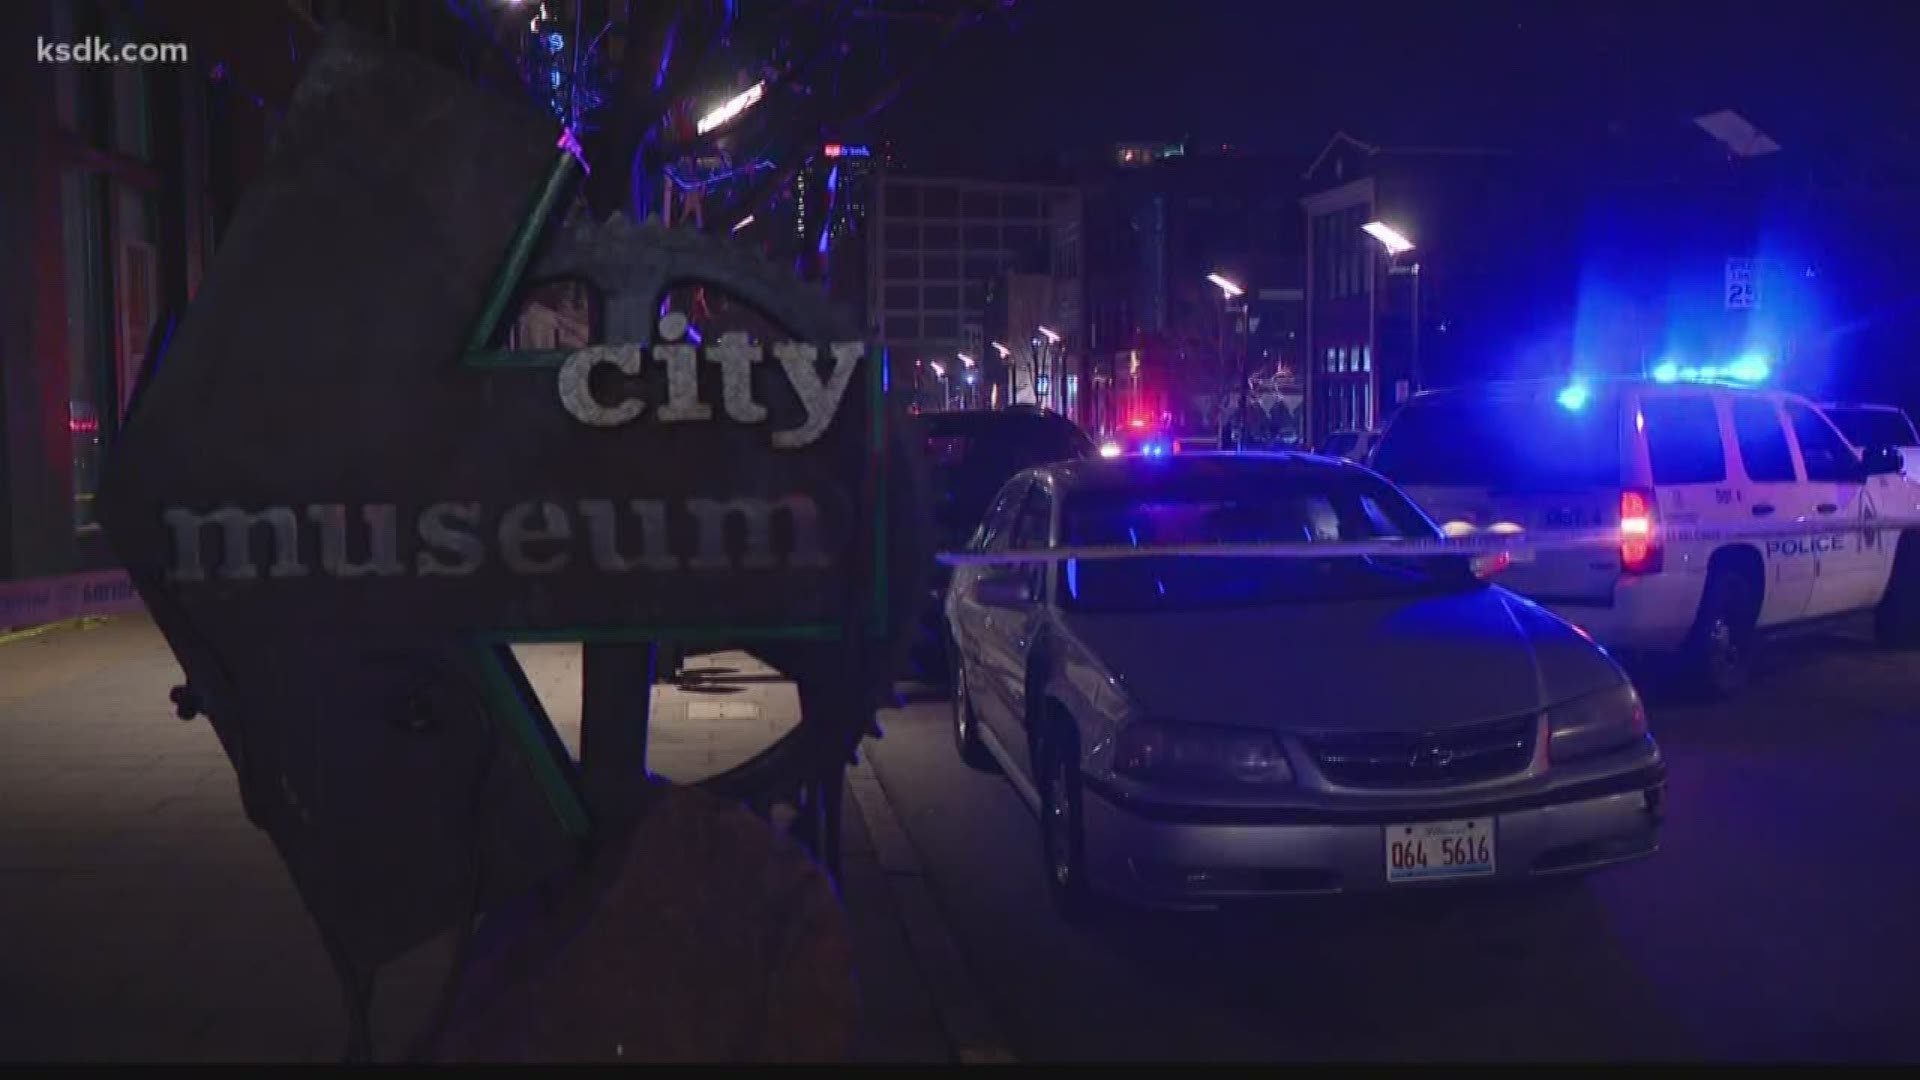 Man killed in Downtown West St. Louis shooting | www.semadata.org